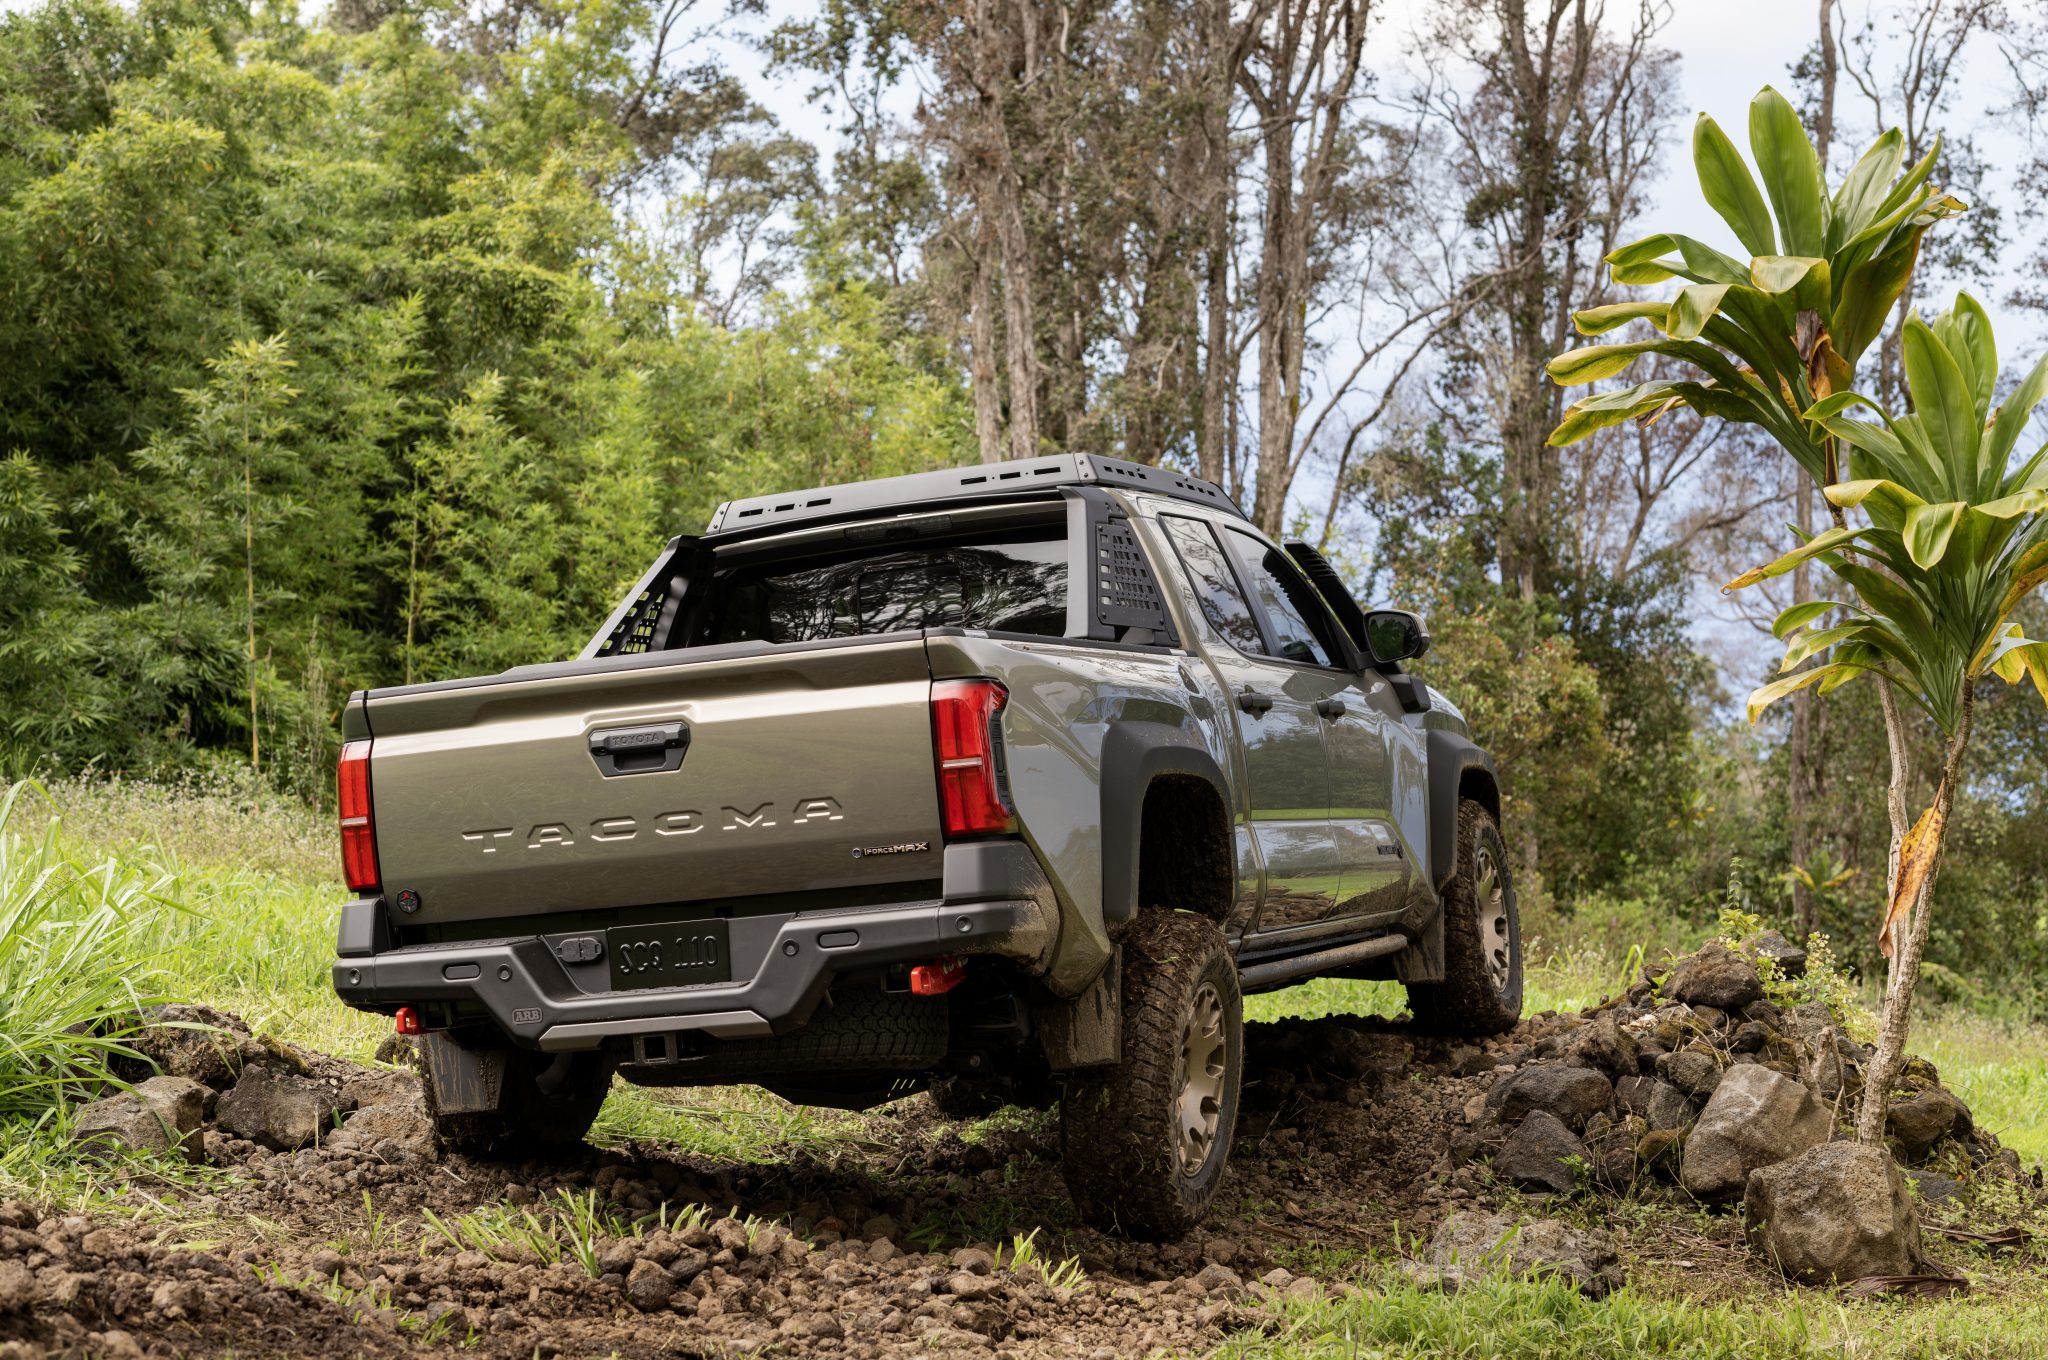 The new Tacoma’s shock-absorbing seats help you keep your eyes on the prize